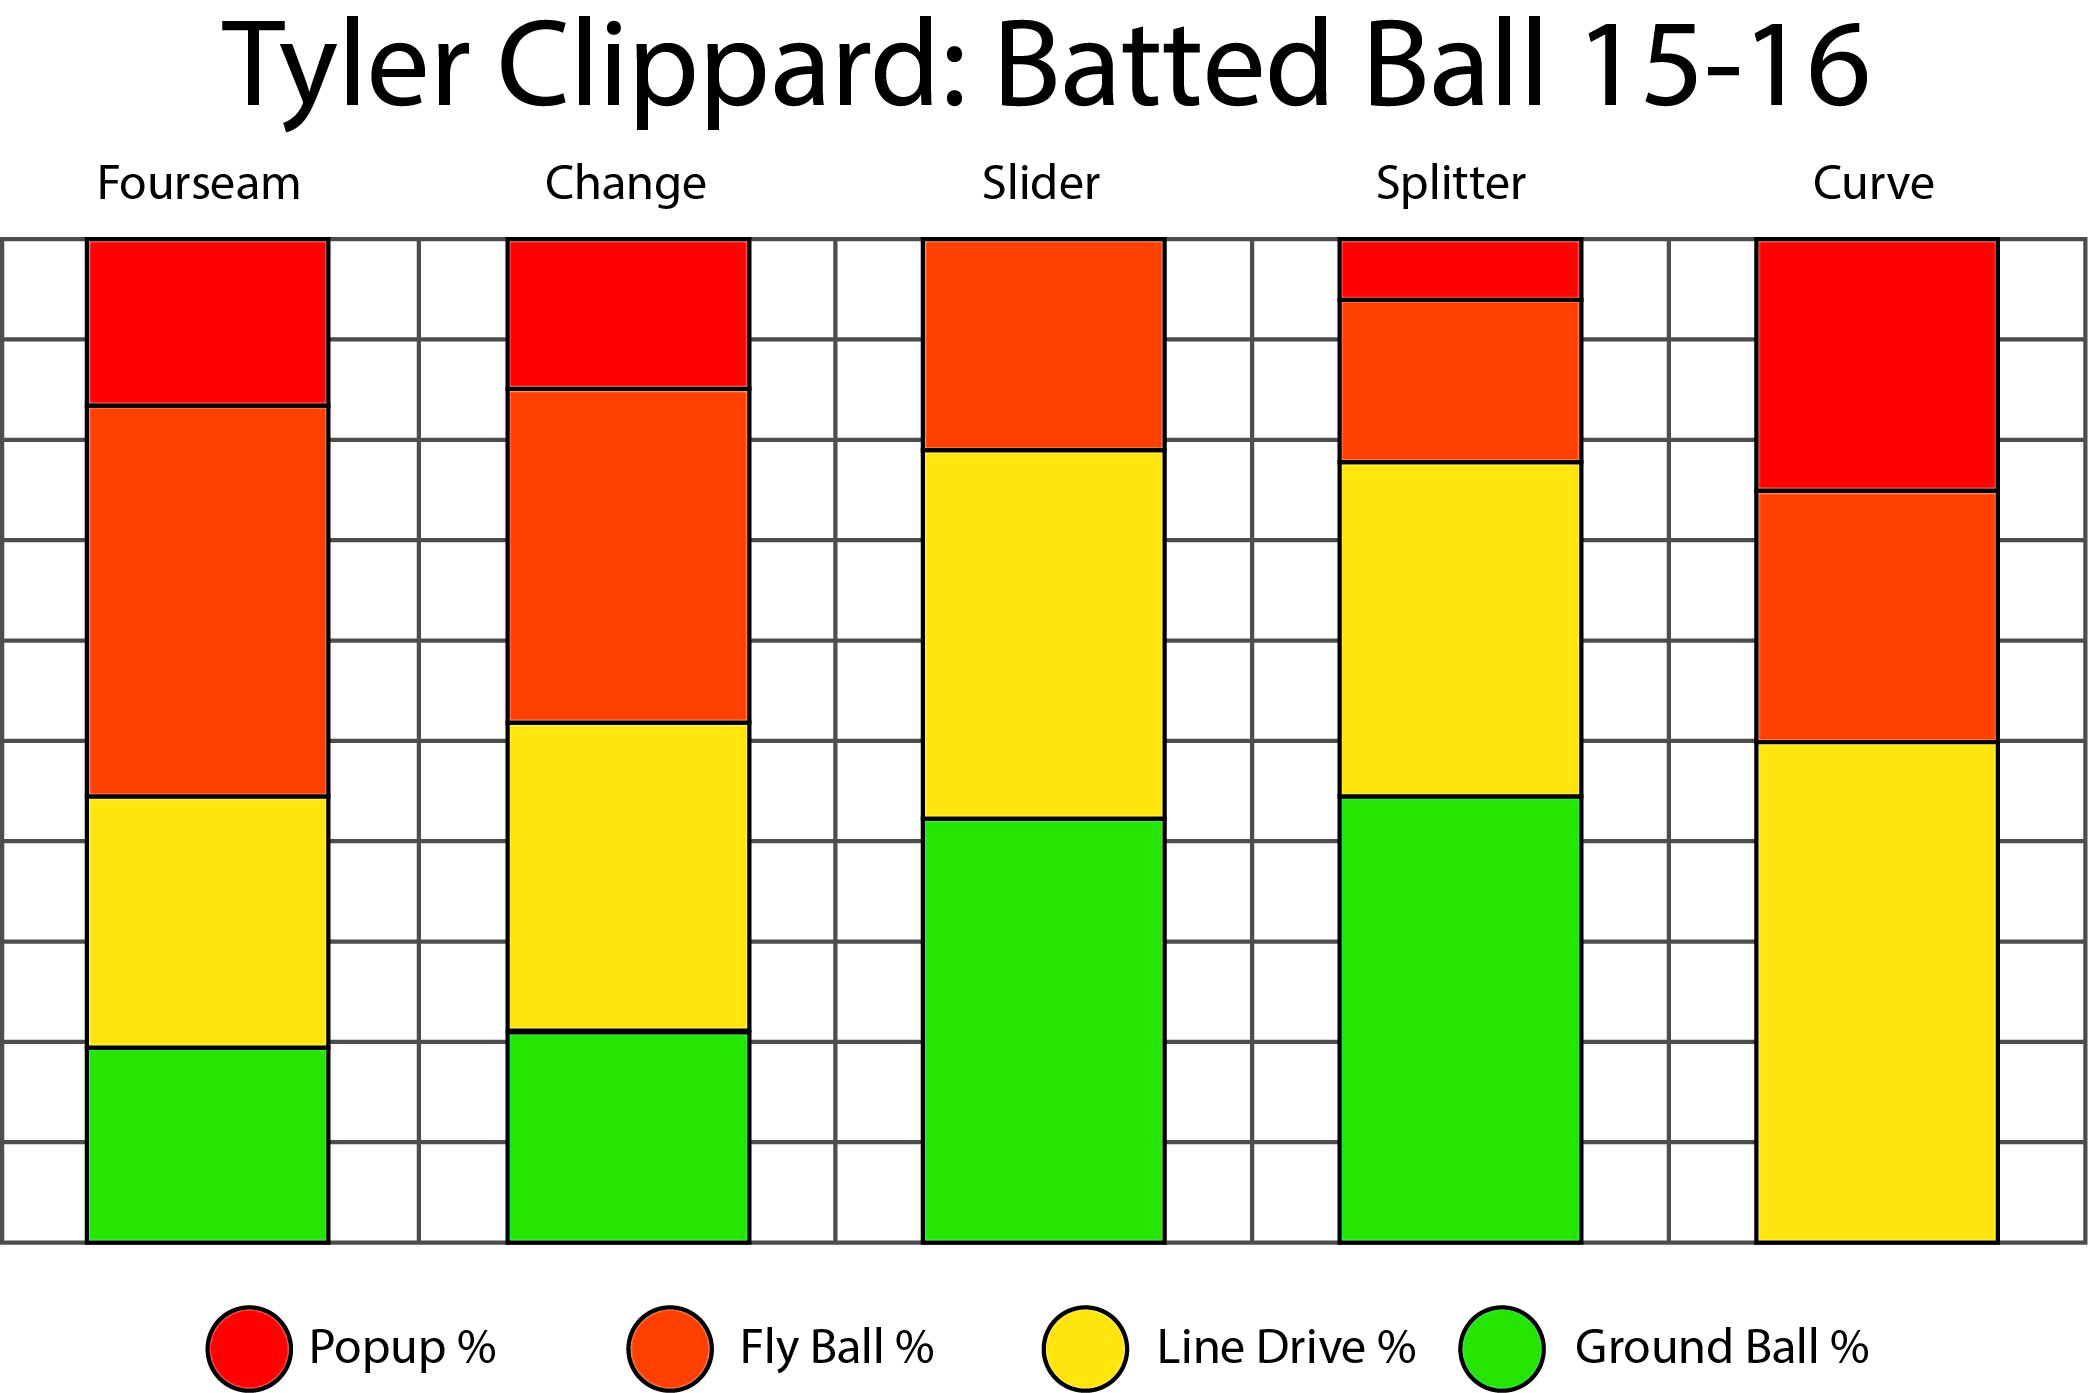 Clippard batted ball